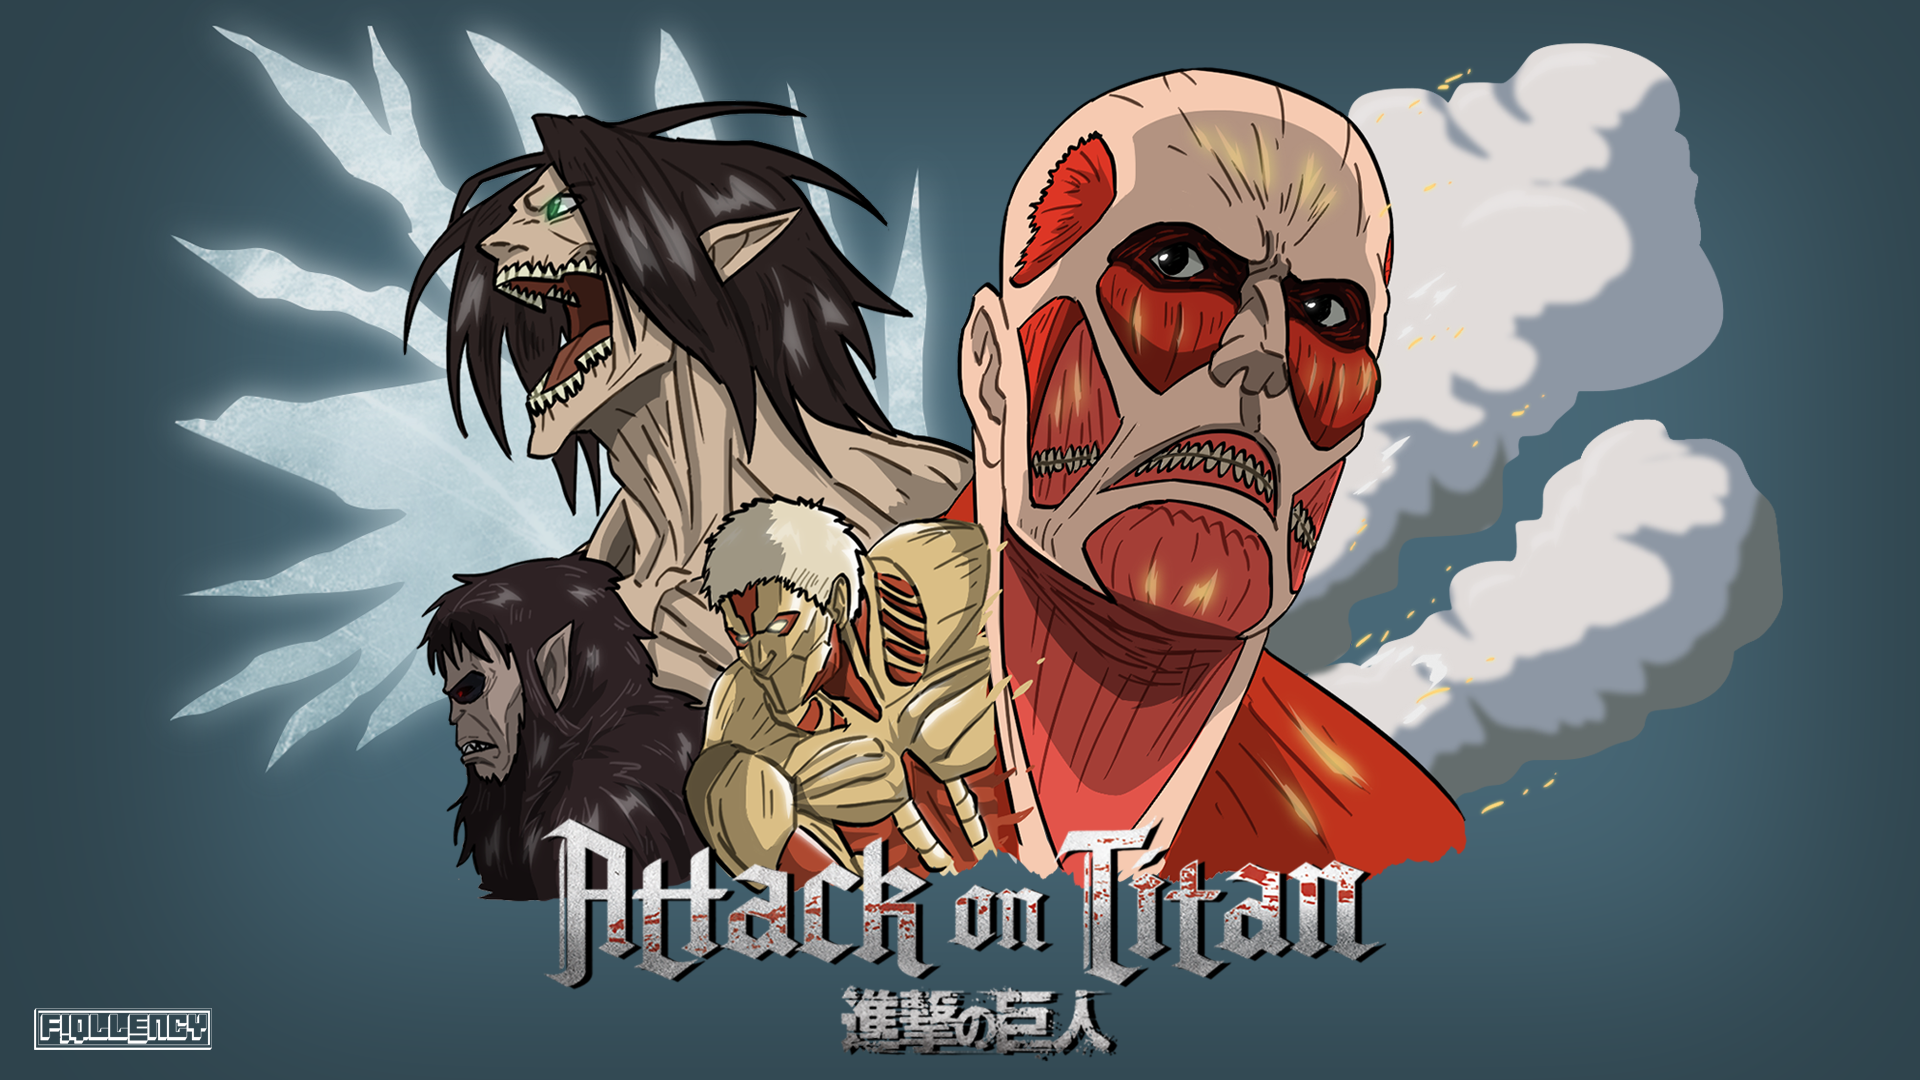 Ver Attack on Titan The Final Season Part 2 (HD) by HiGuys920 on